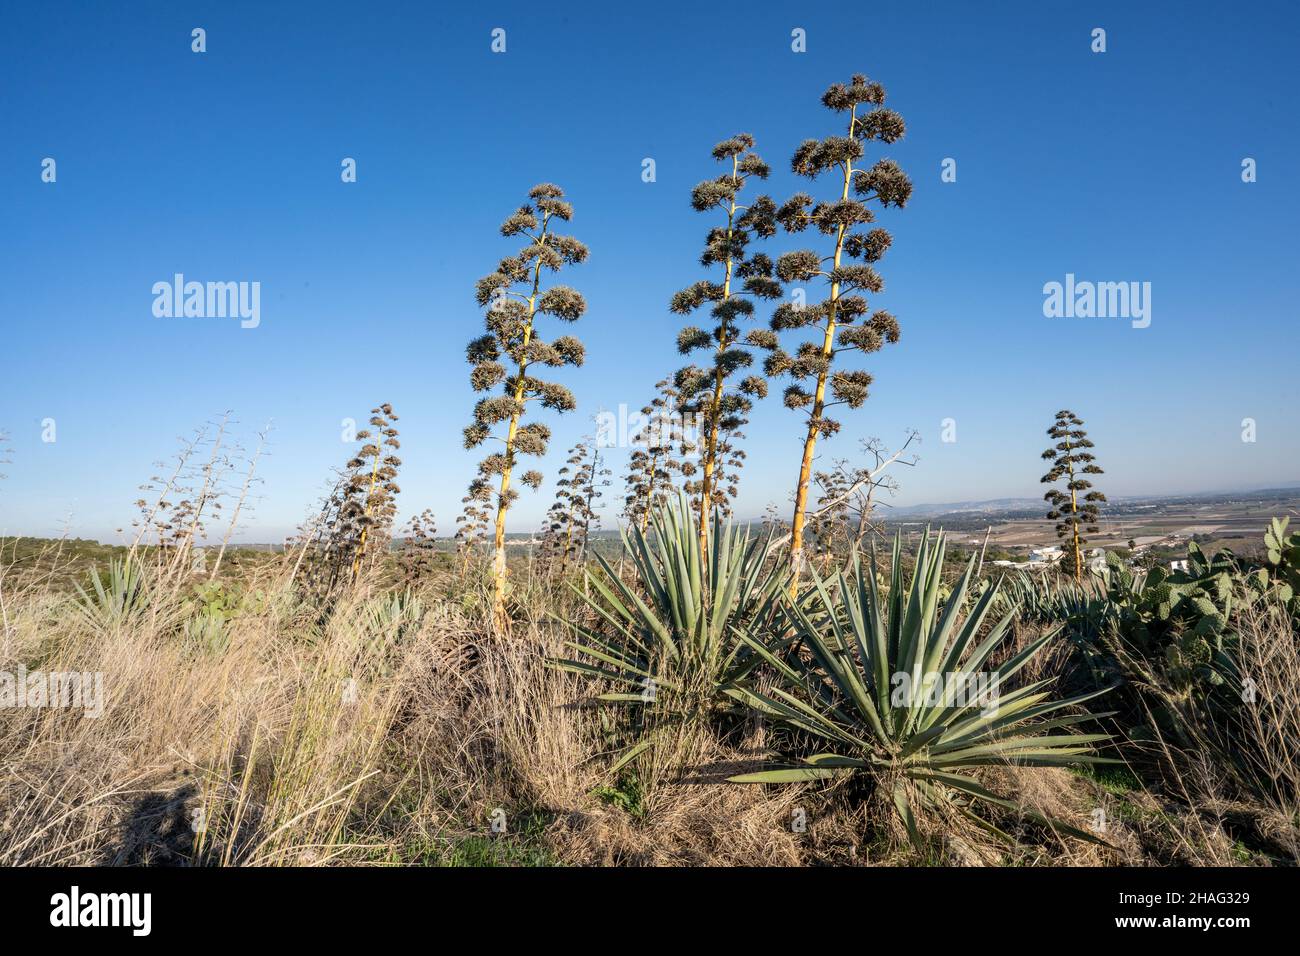 Sisal (Agave sisalana), is a species of flowering plant native to southern Mexico but widely cultivated and naturalized in many other countries. It yi Stock Photo